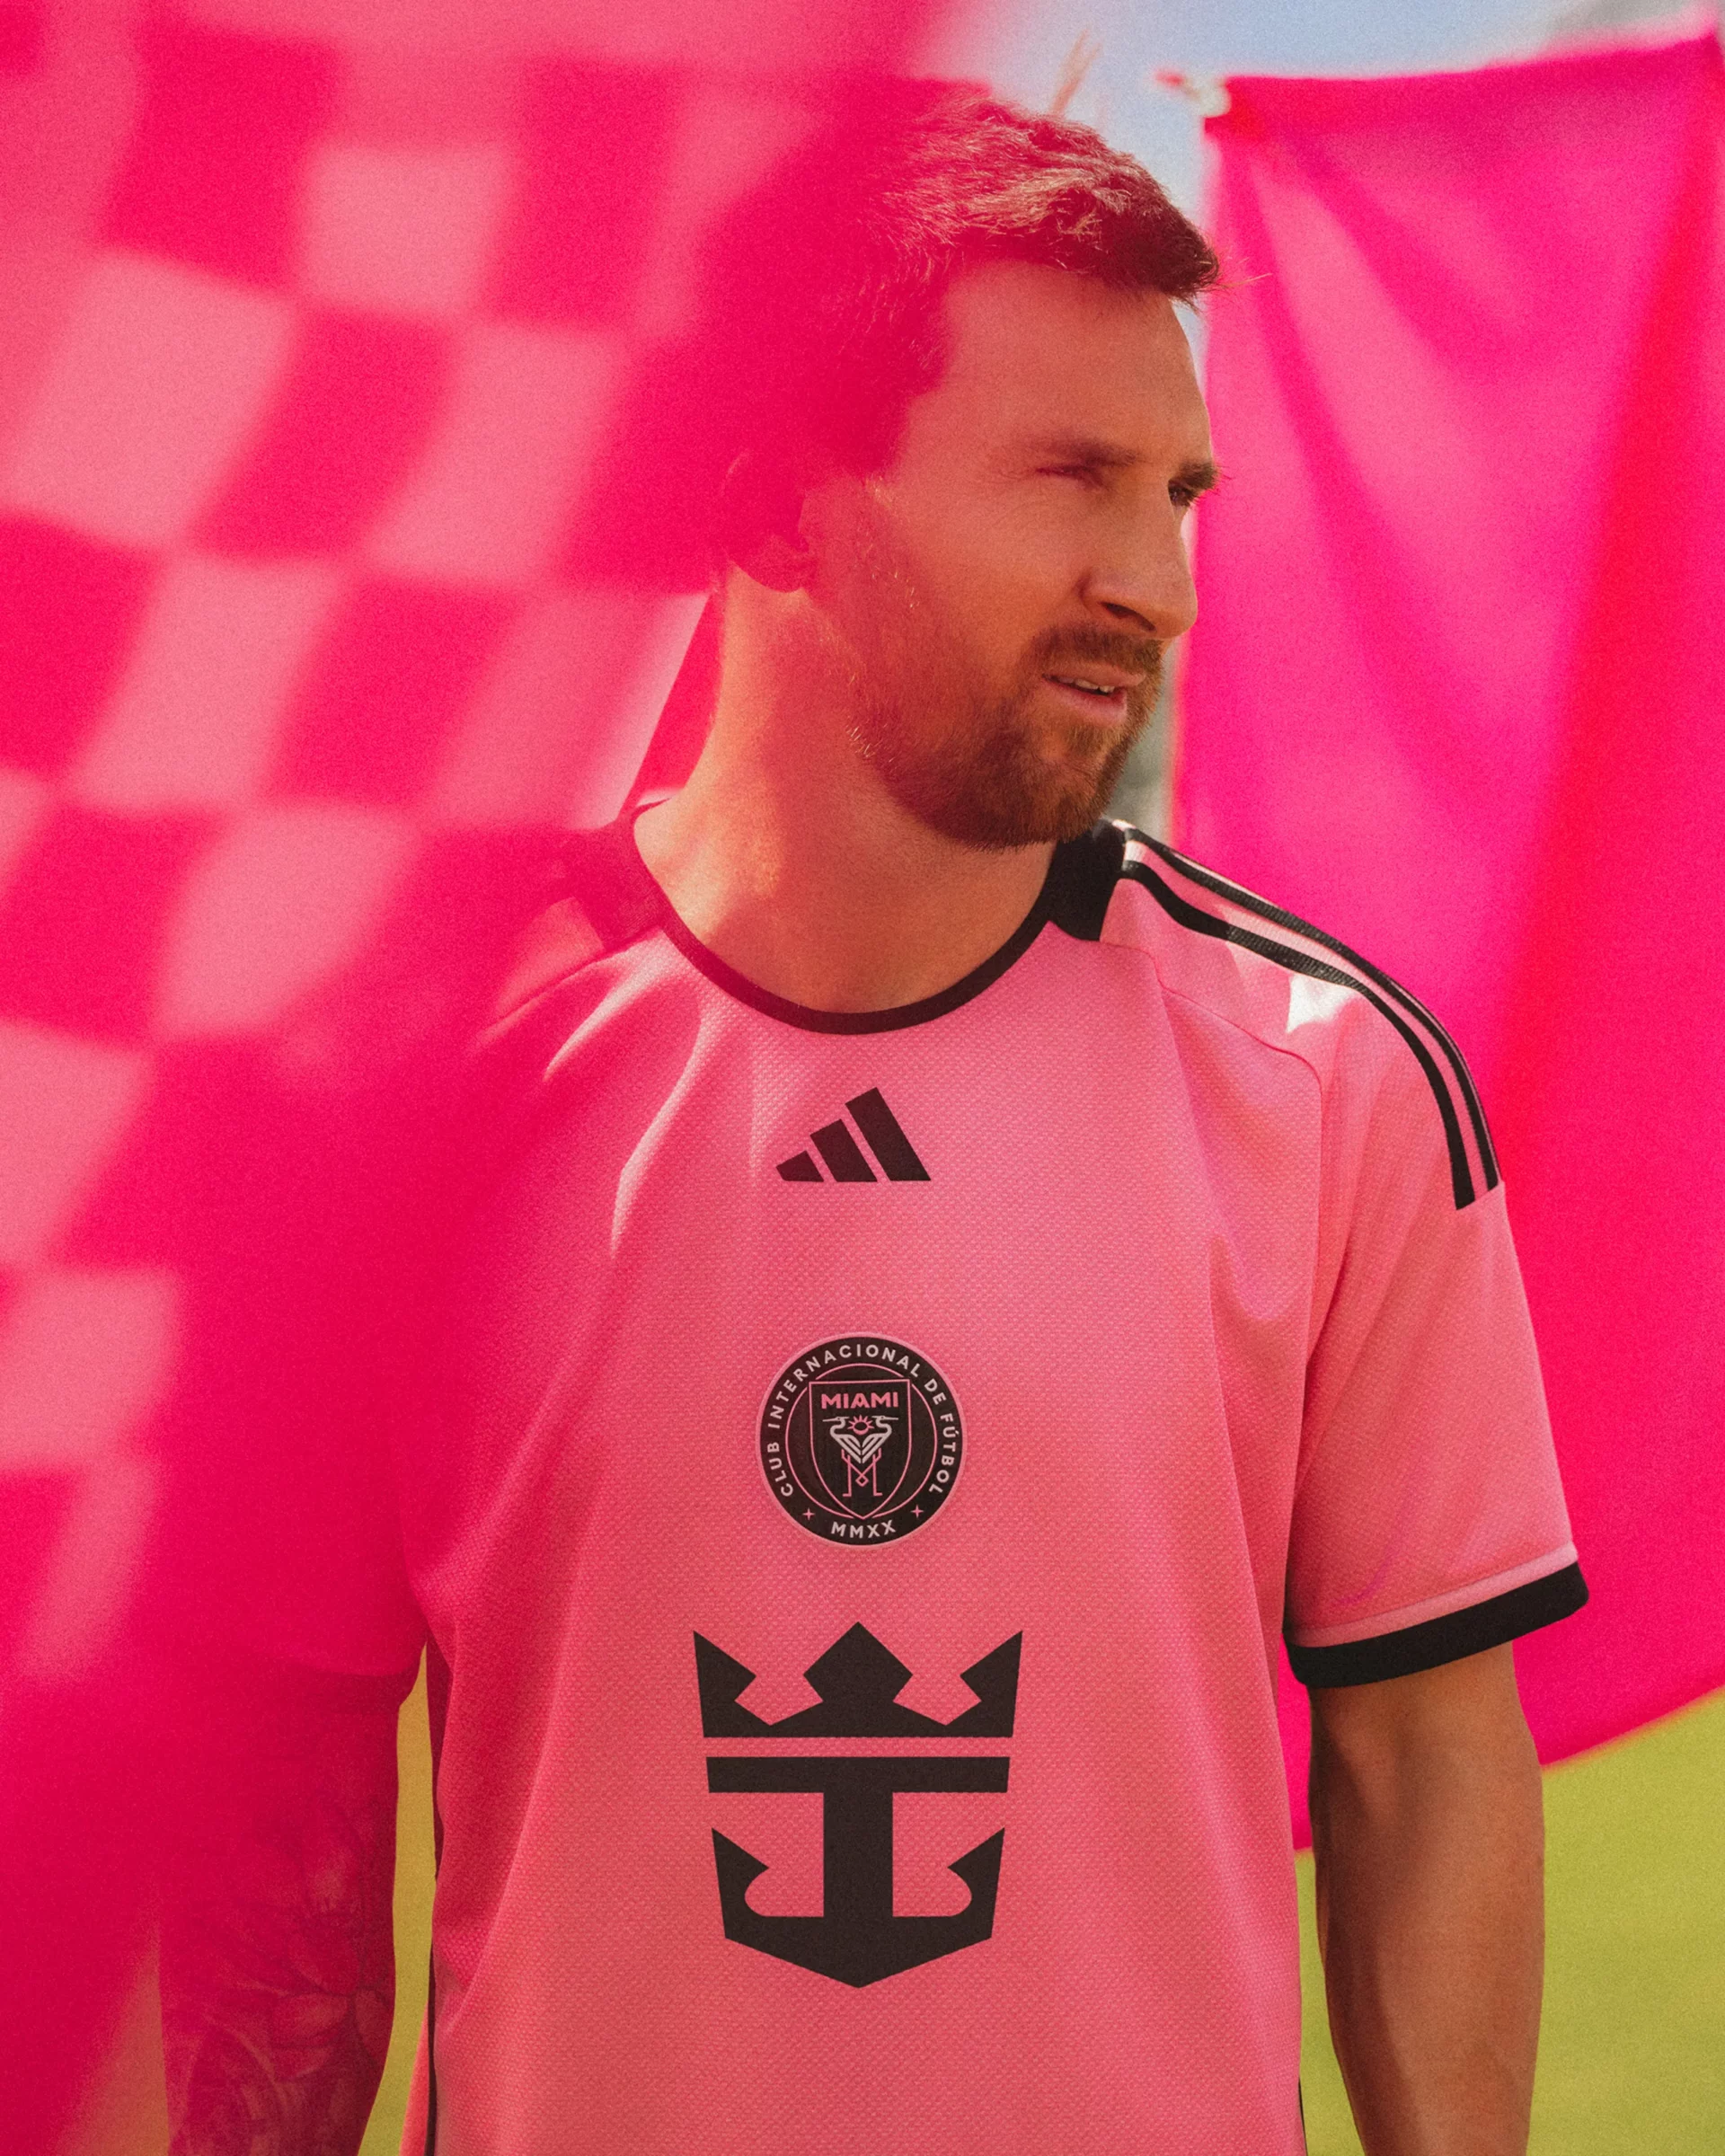 Lionel Messi in the new Inter Miami 2getherness jersey